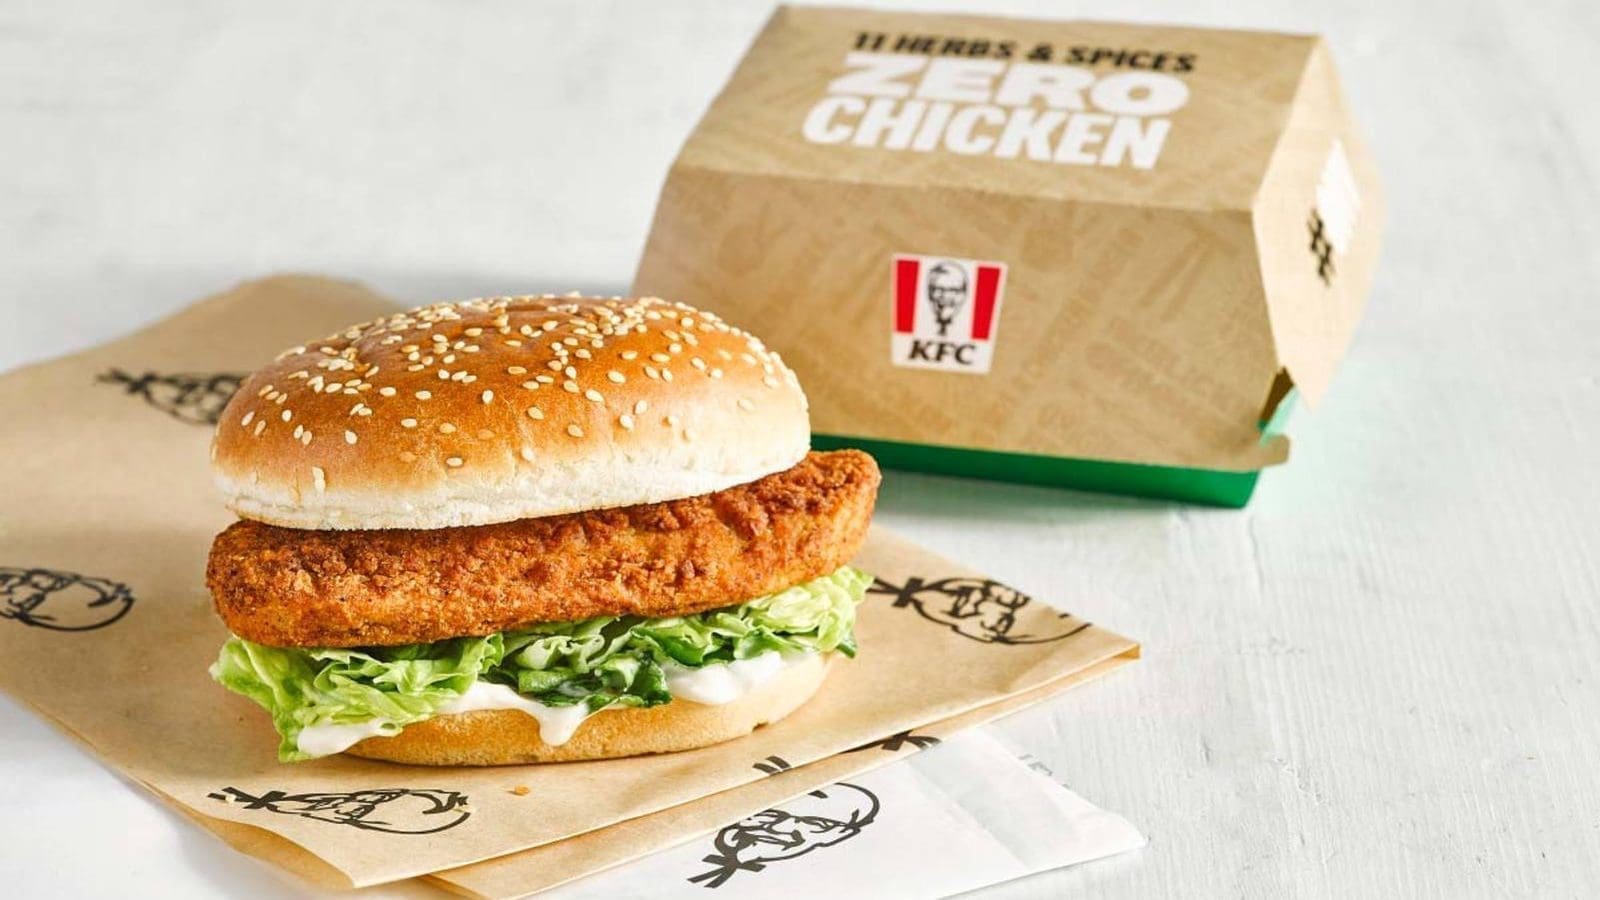 After UK success, KFC plans to roll out meat free alternatives in multiple European countries